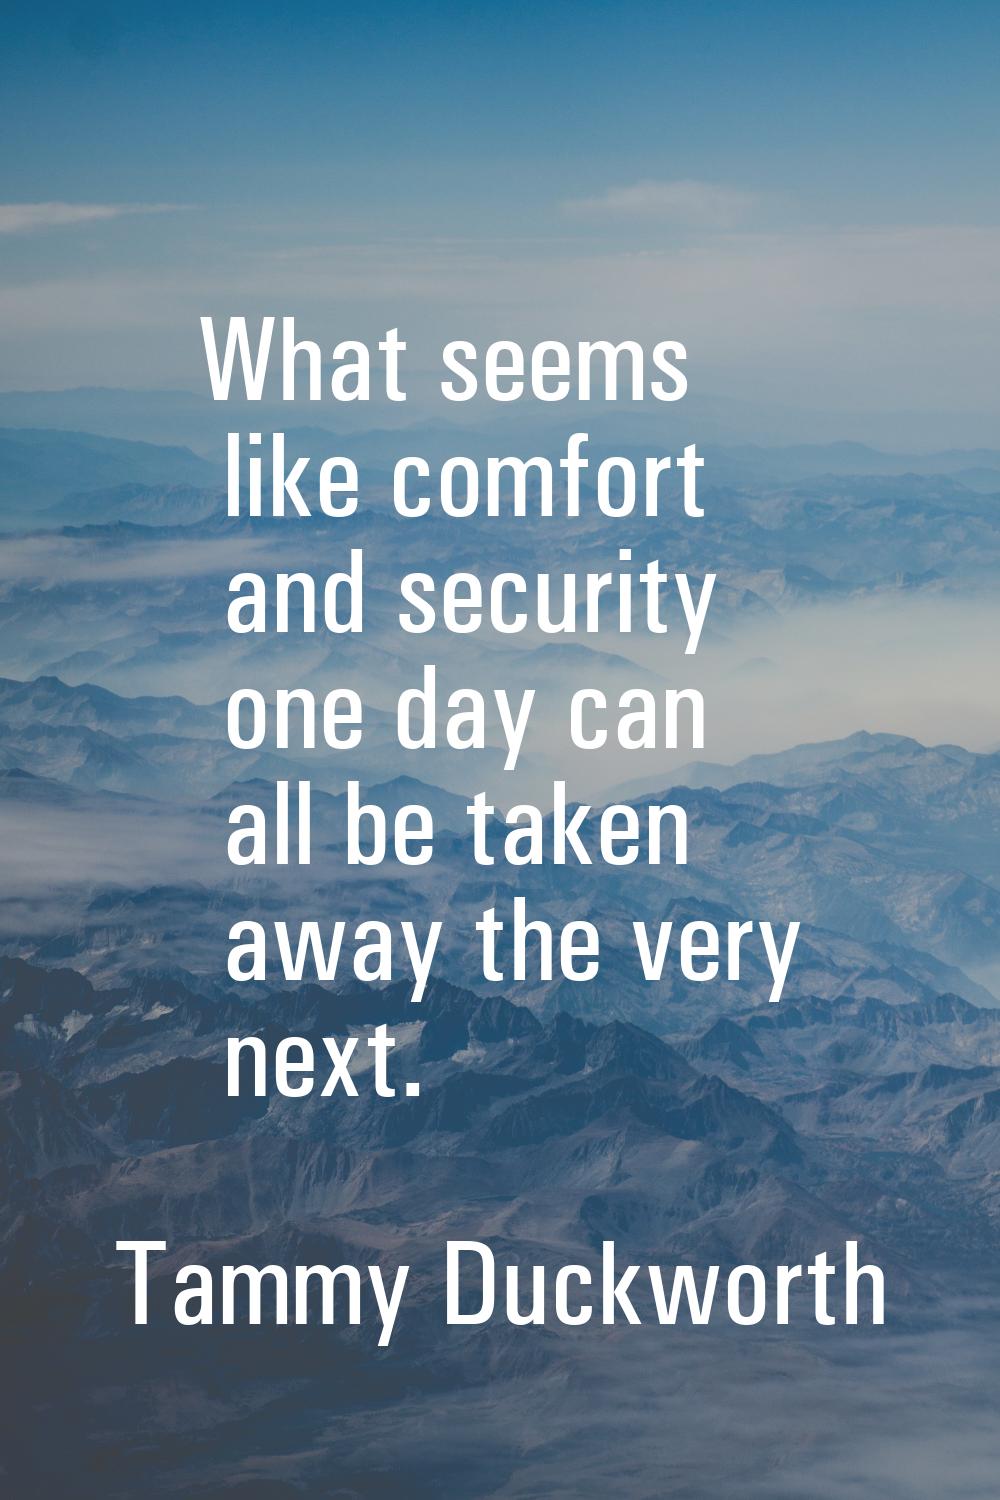 What seems like comfort and security one day can all be taken away the very next.